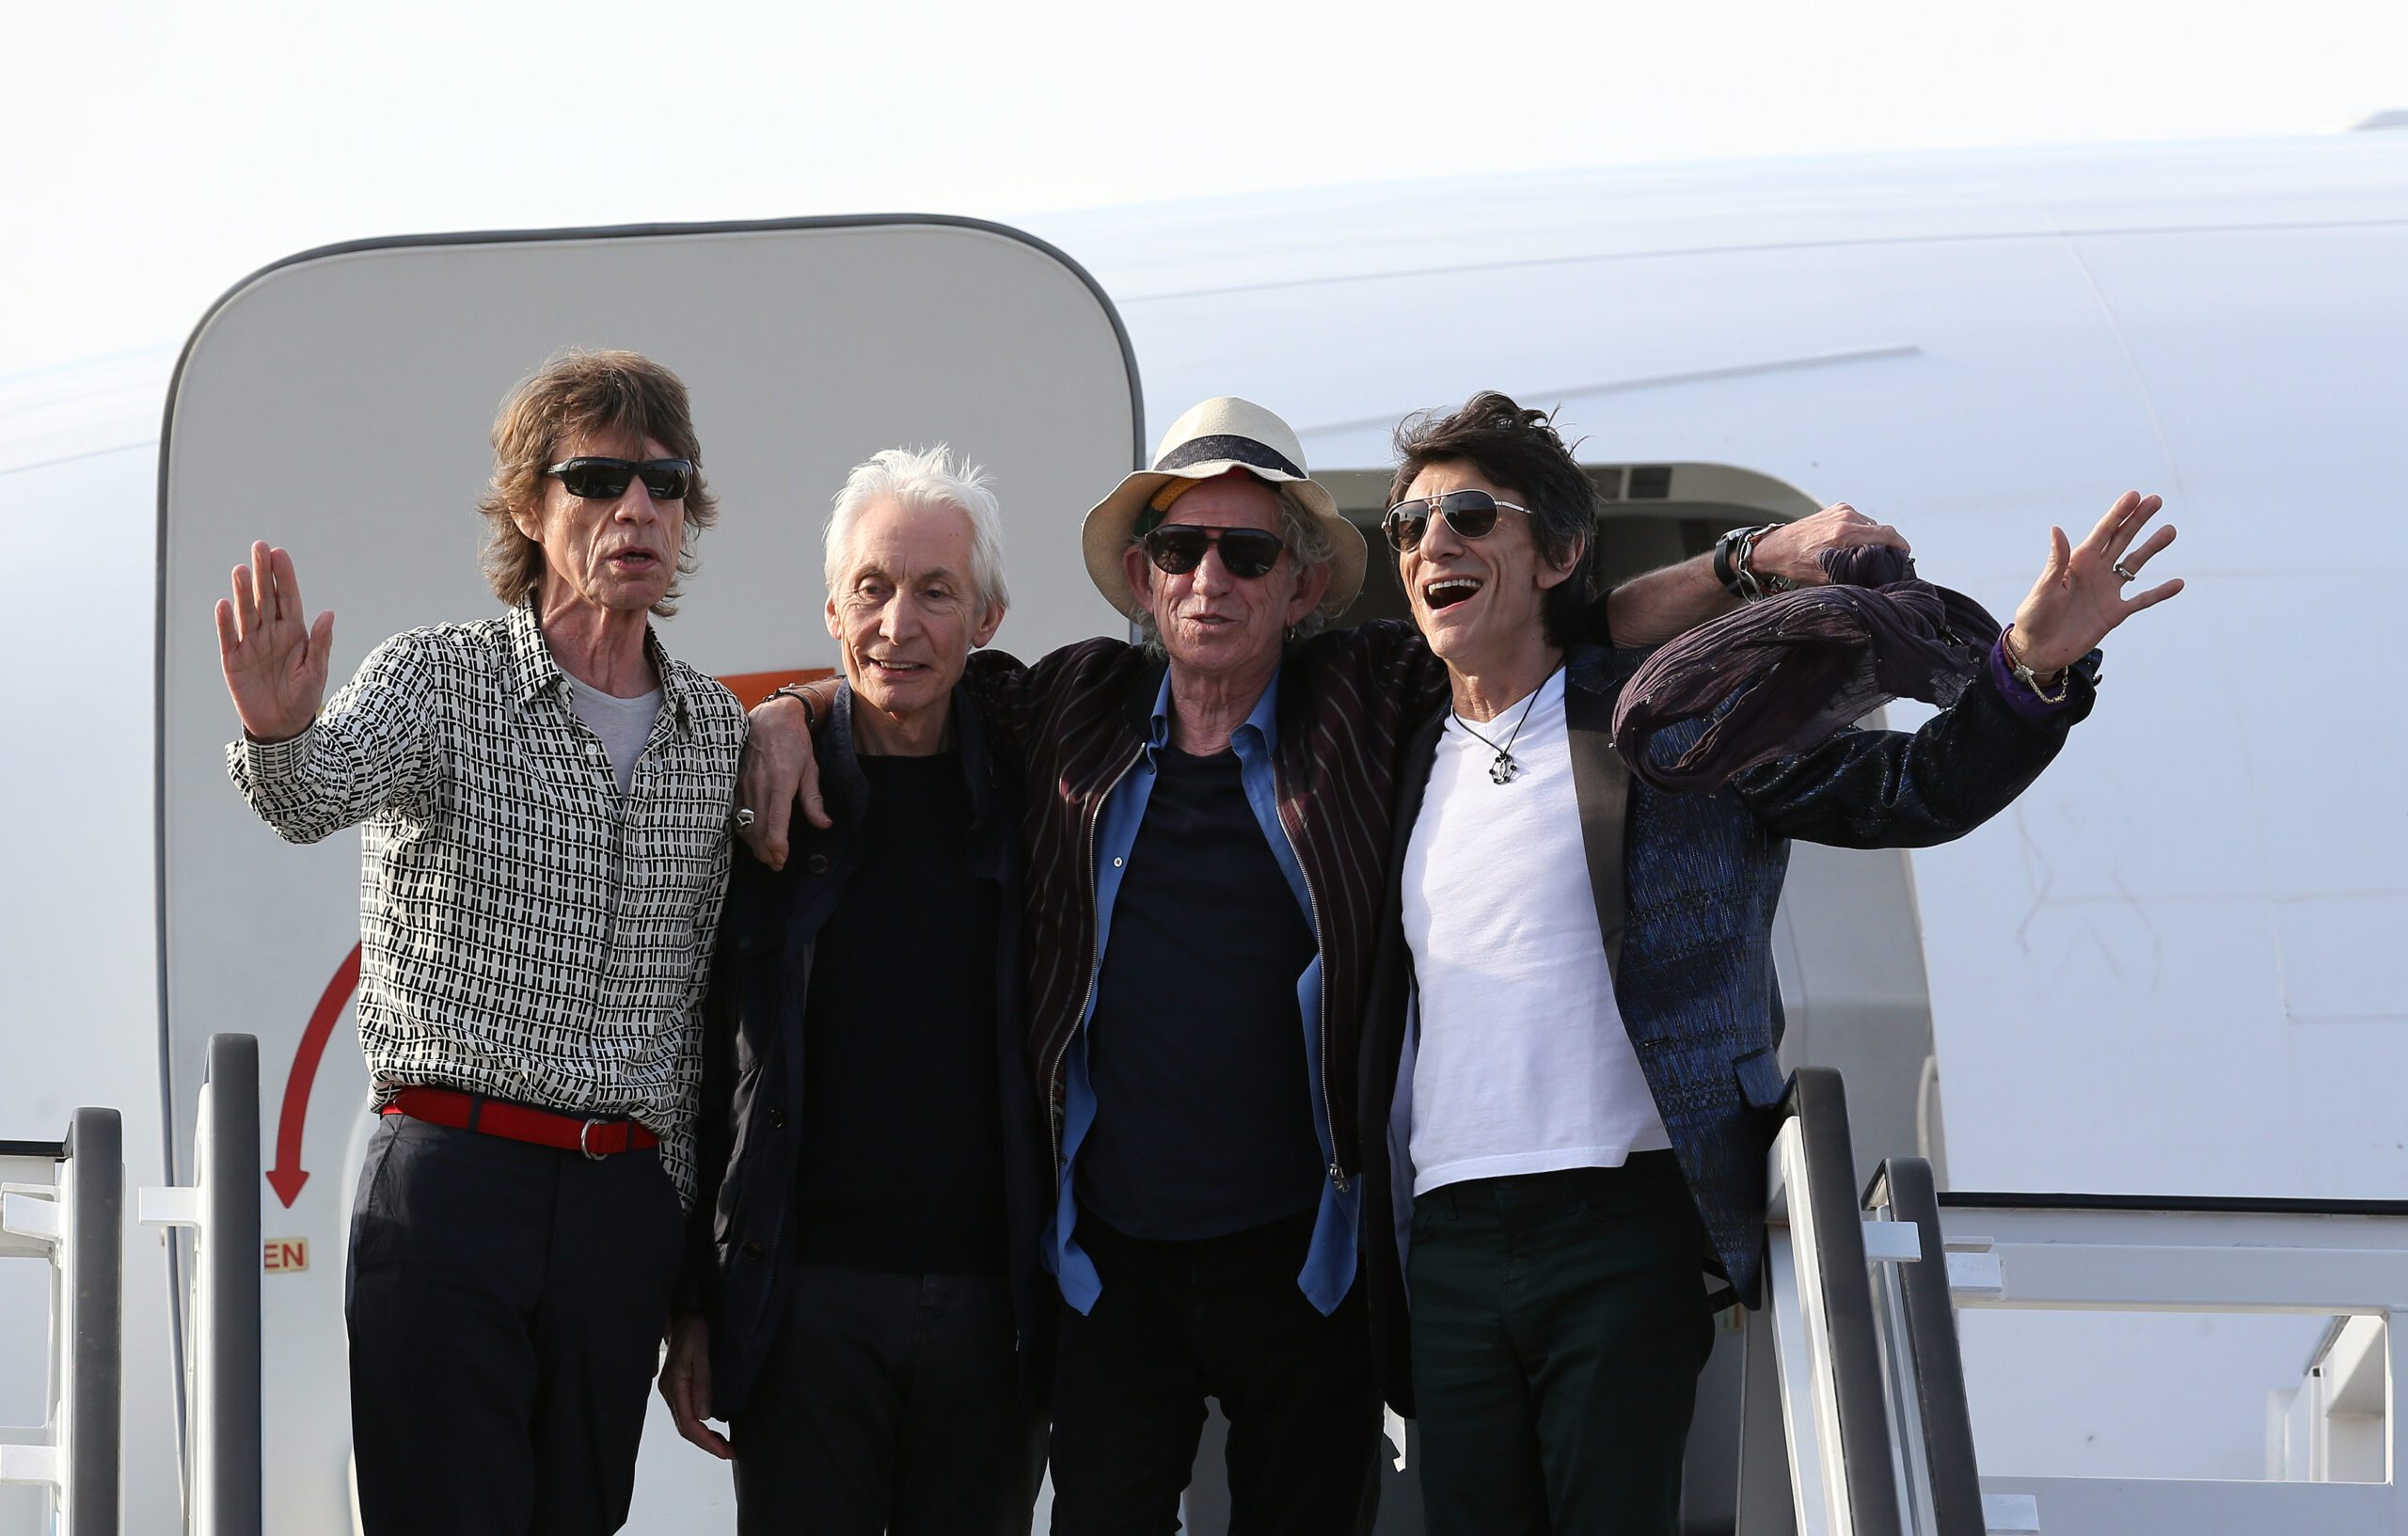 Rolling Stones arrive in Cuba to play free rock concert